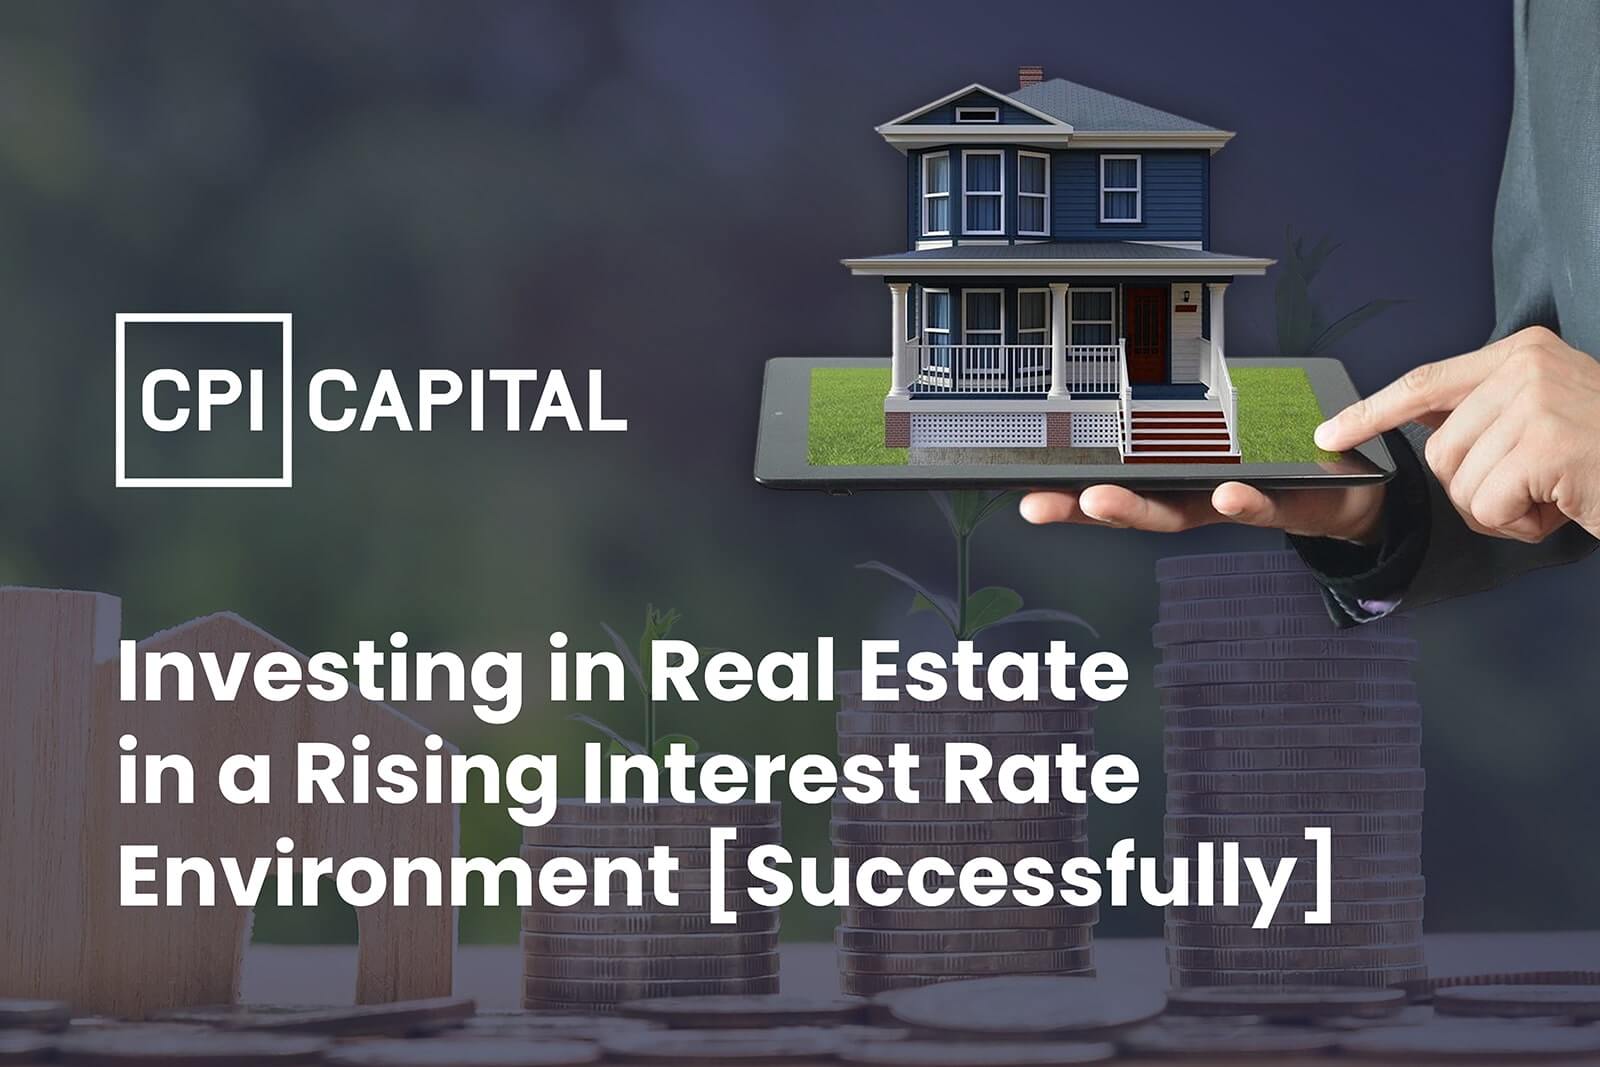 Investing in Real Estate in a Rising Interest Rate Environment Successfully